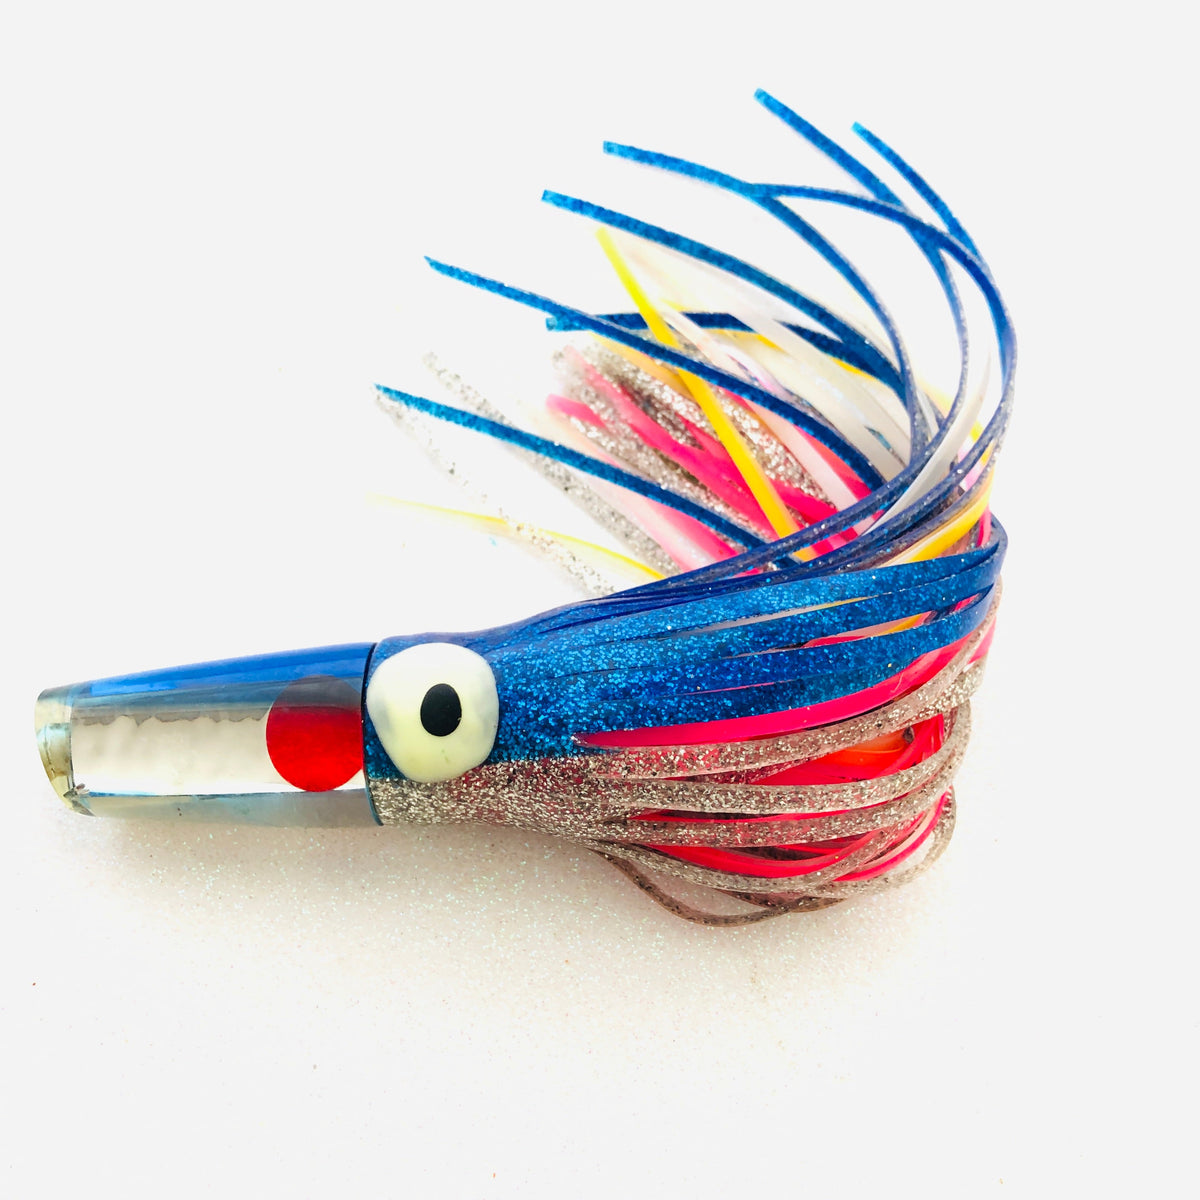 Maker Unknown-Calling all Ahi Slayers! Don&#39;t Let This One Get Awayy-Used Lures